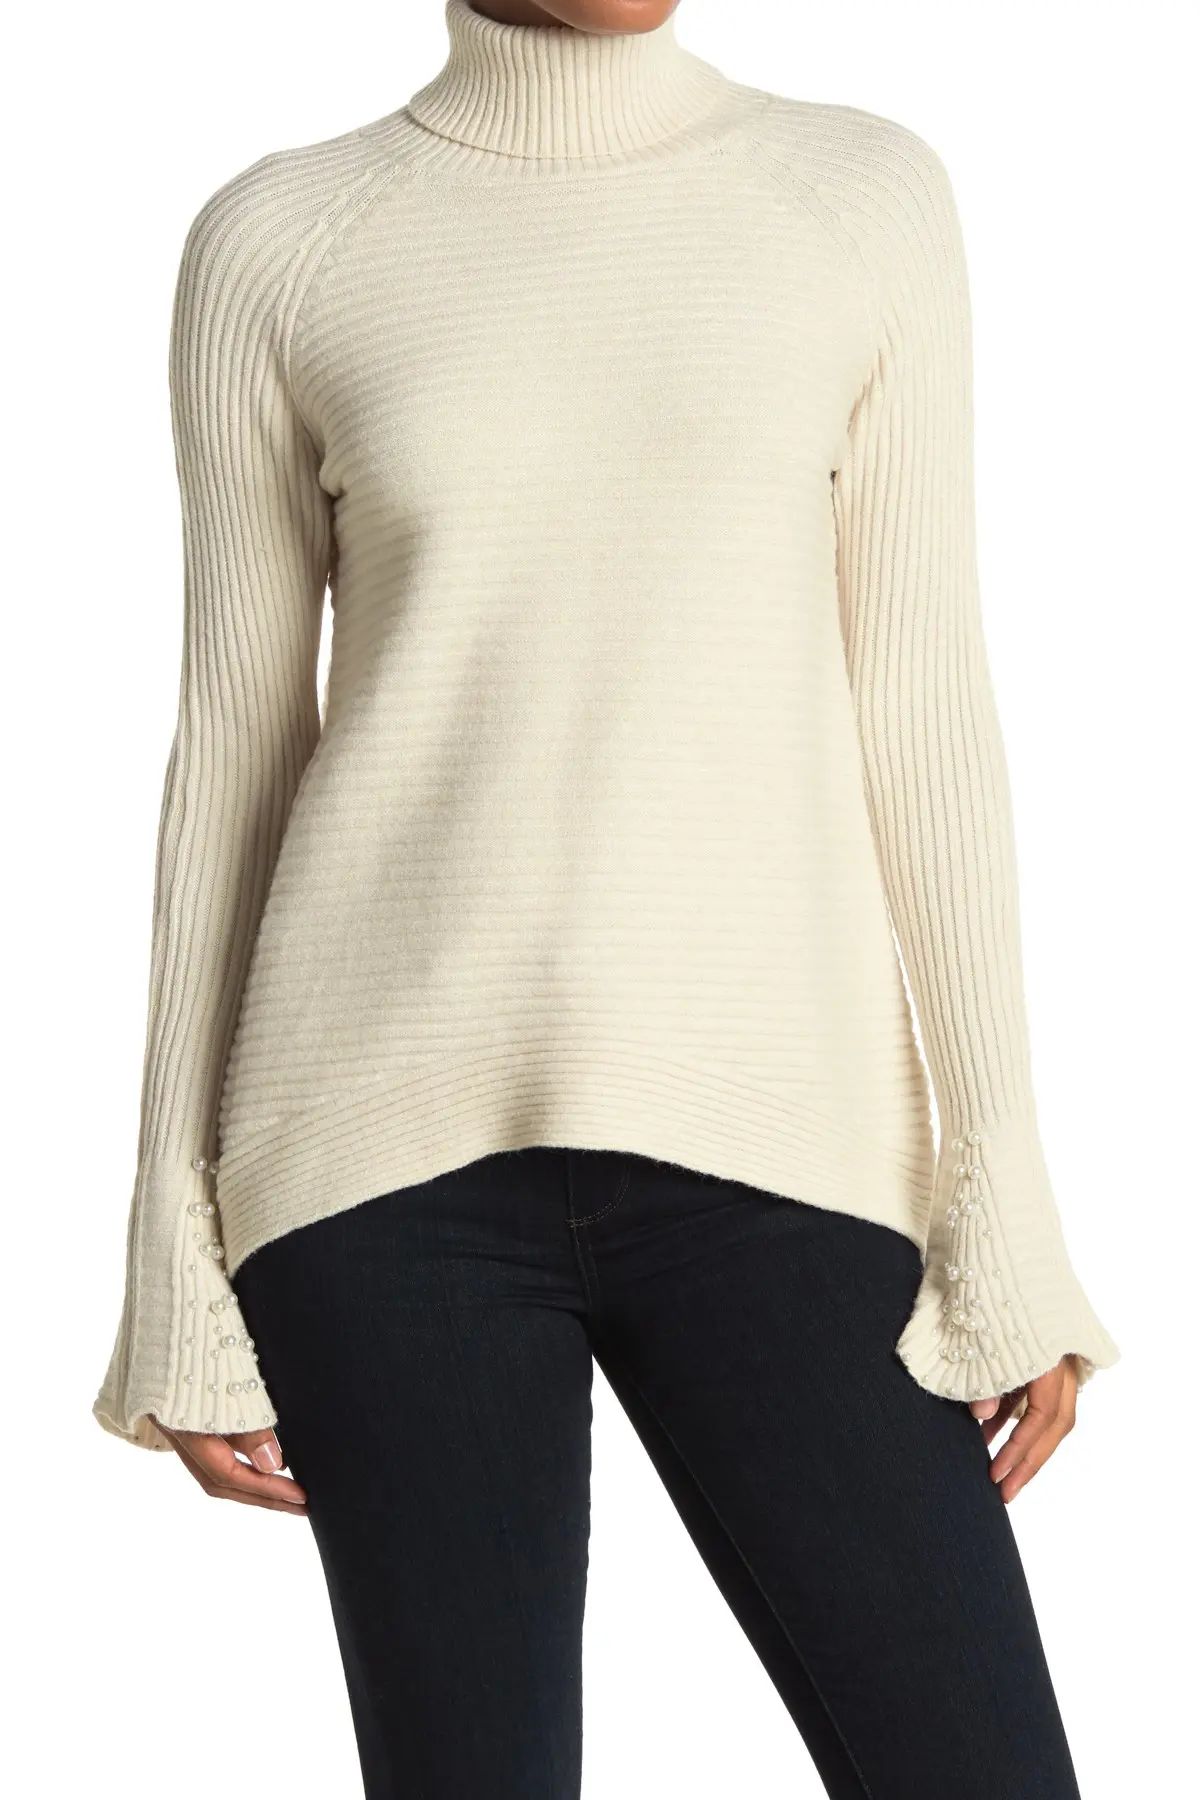 Cyrus Faux Pearl Sleeve Ribbed Knit Sweater at Nordstrom Rack | Hautelook